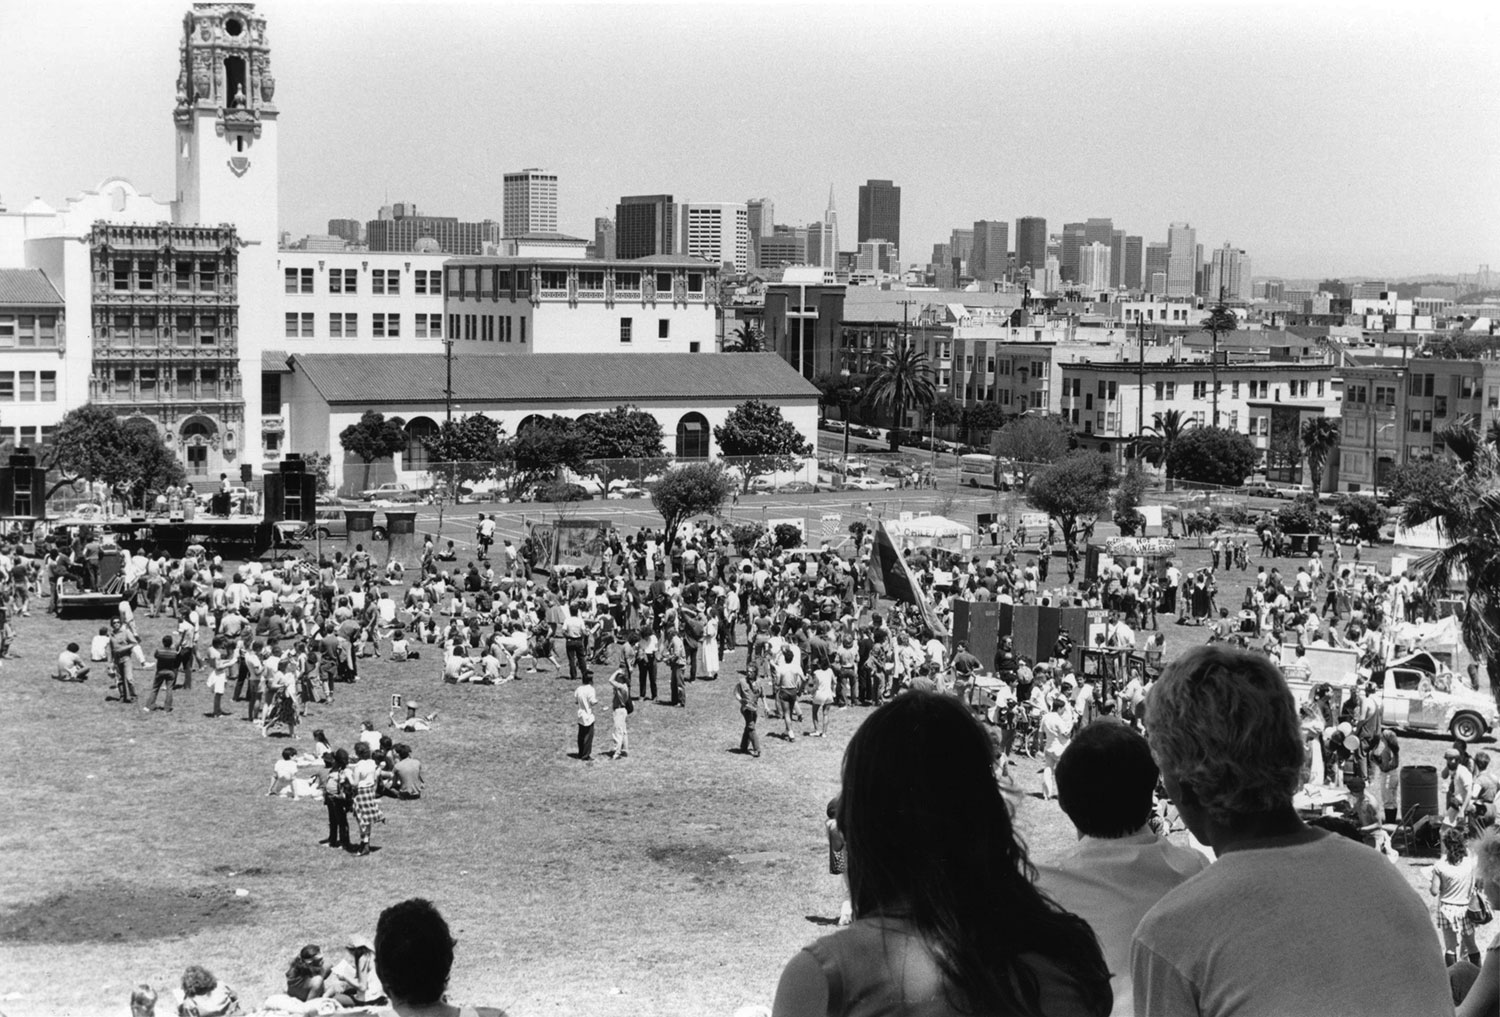  “The End of the World's Fair”, Mission Dolores Park, May 12, 1984 